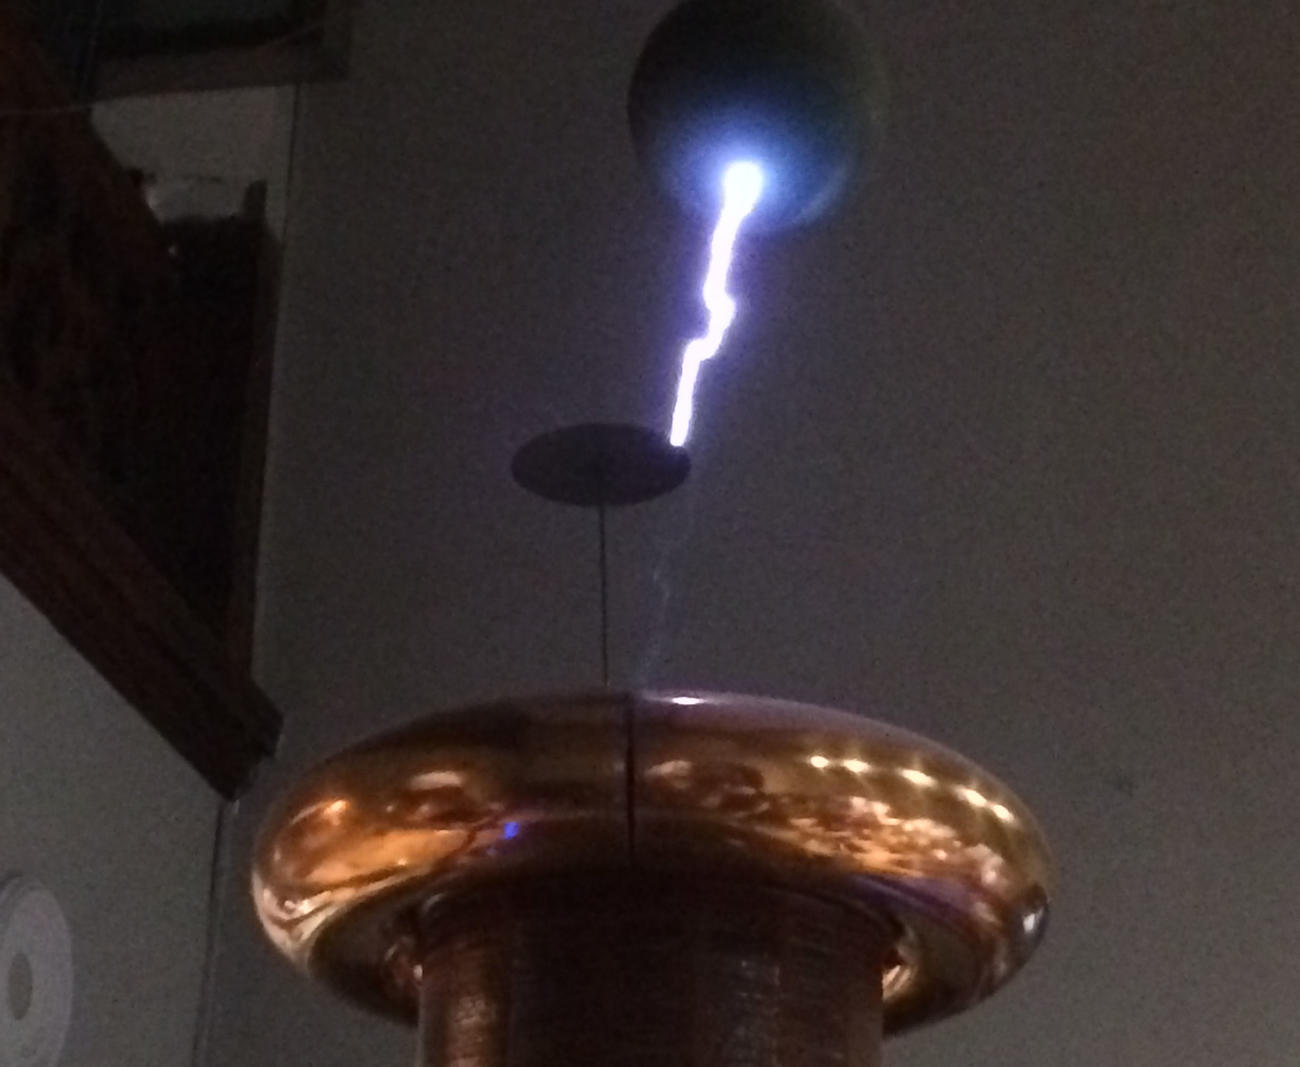 Electrical discharge demonstration